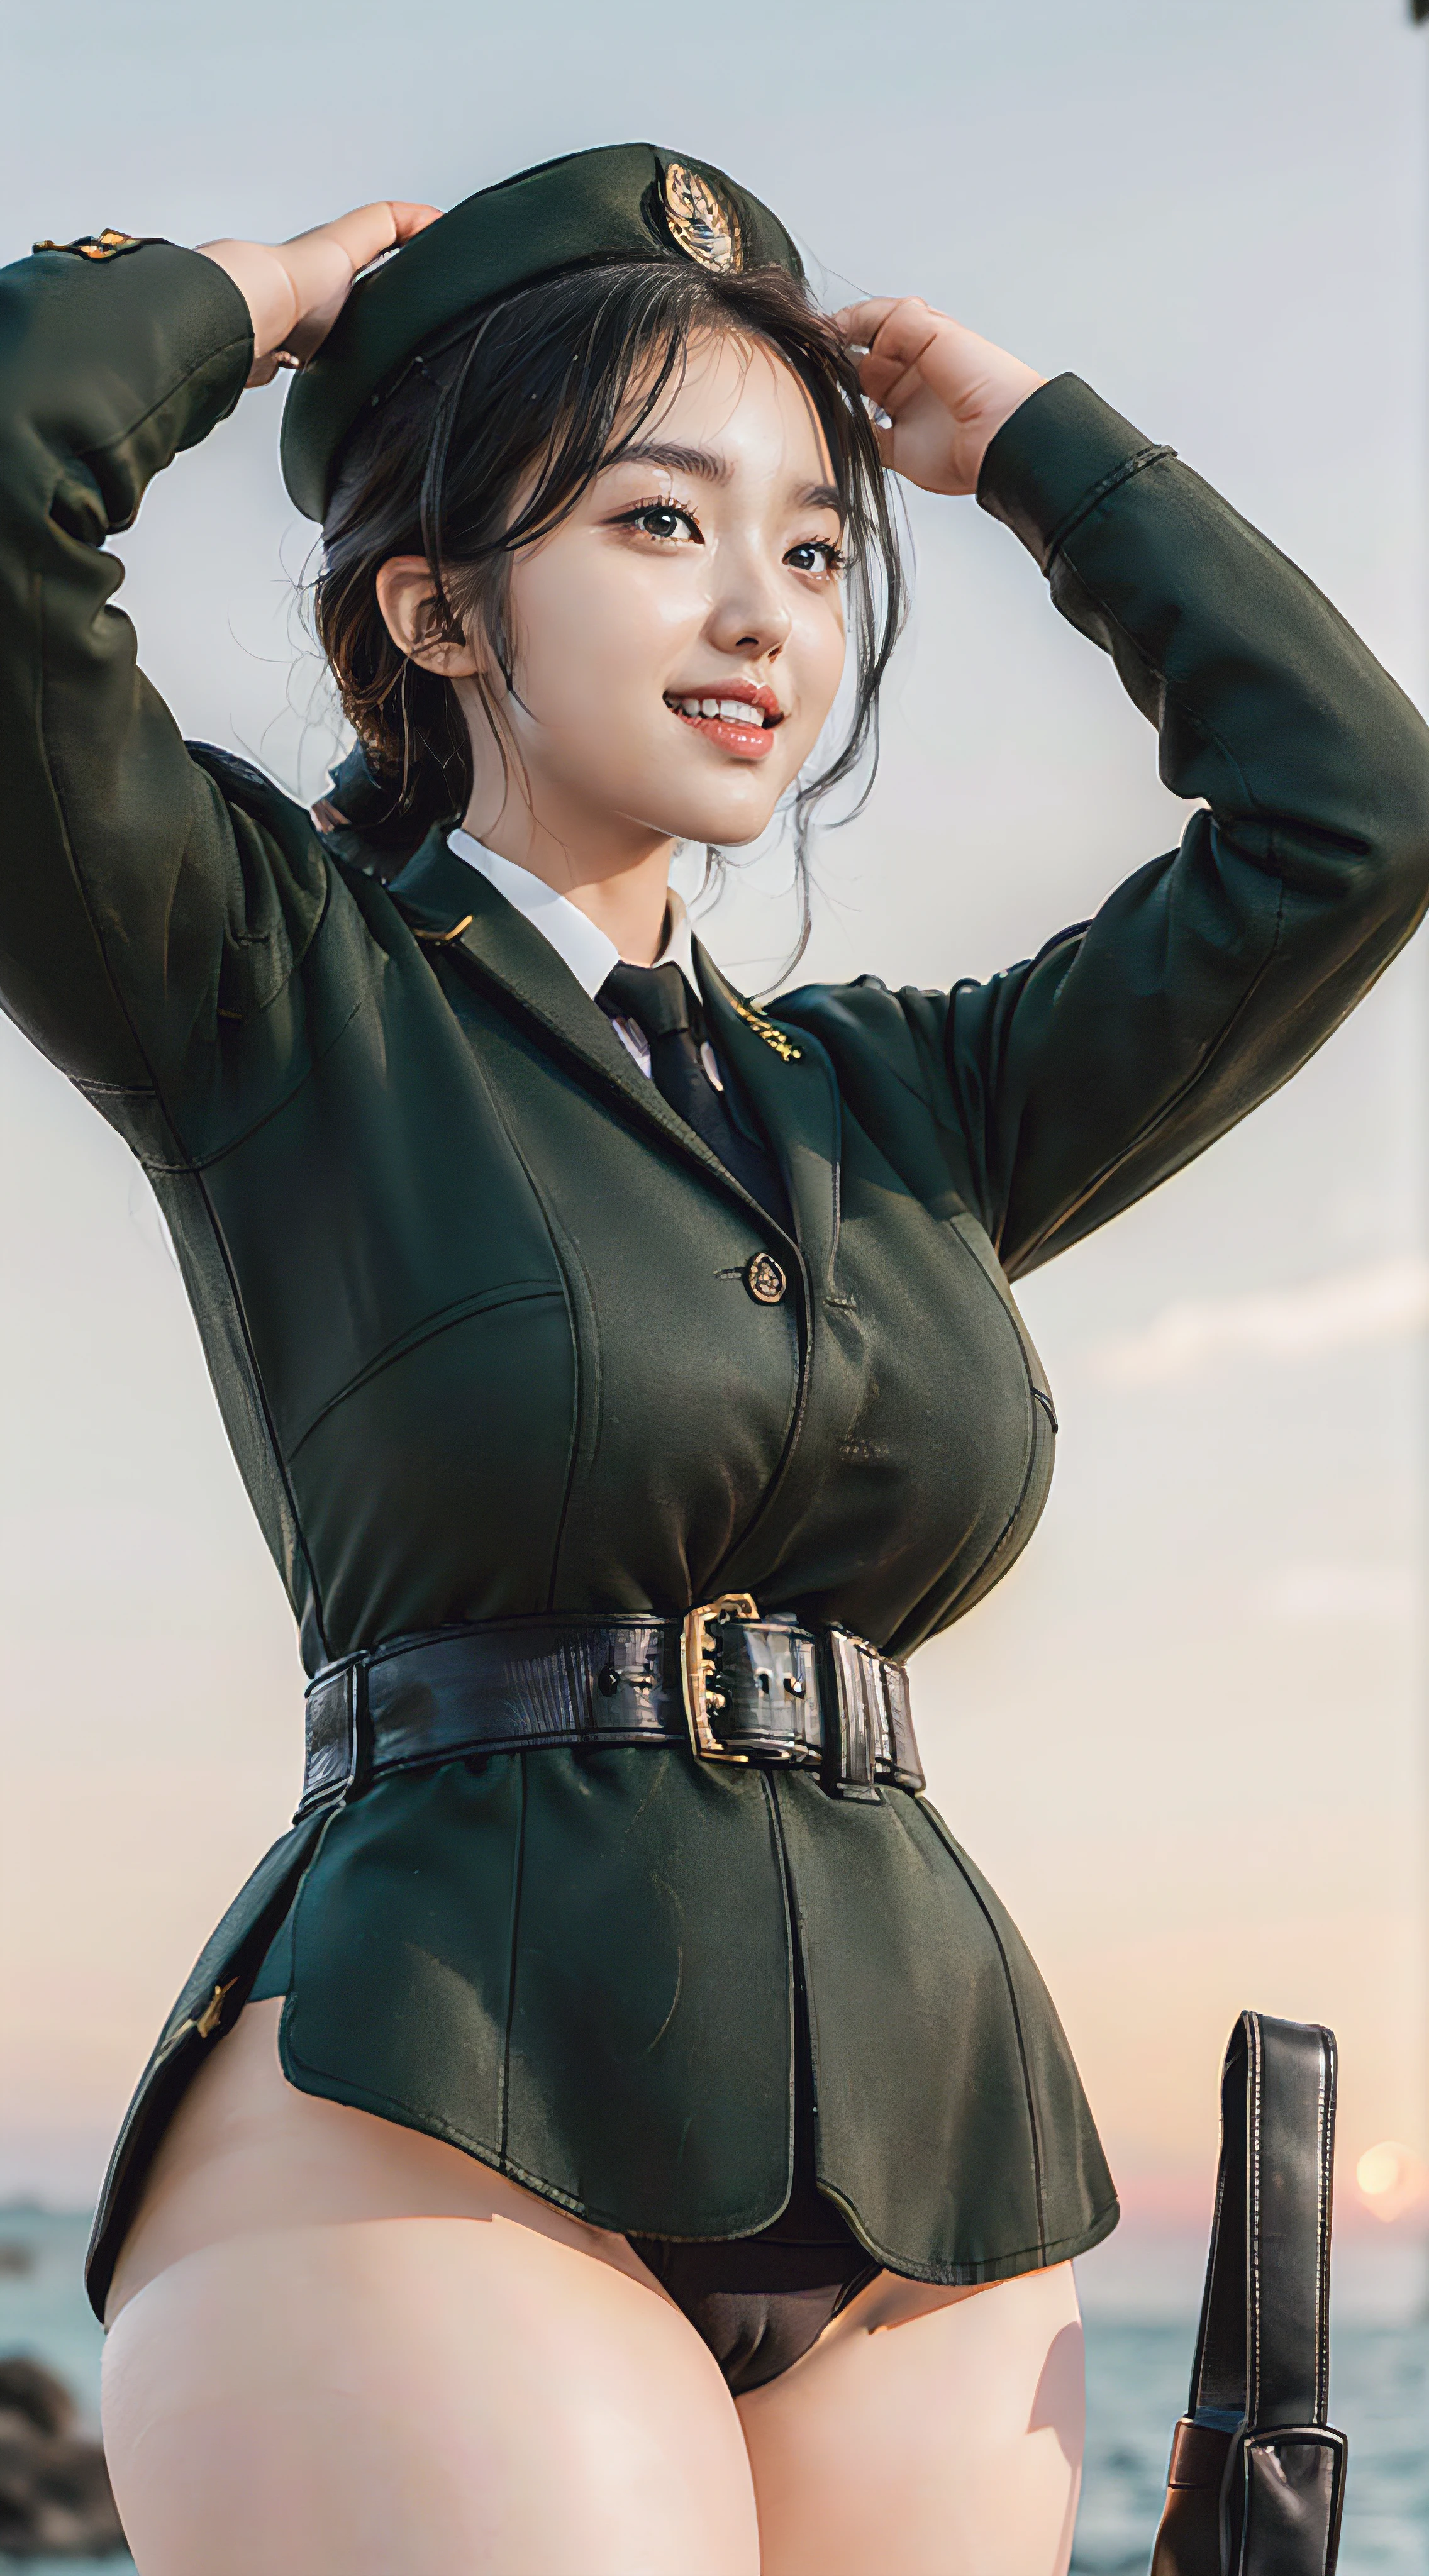 Usually detailed CG Unity 8K wallpaper，（tmasterpiece），（Best quality），（ultra - detailed），（ultra real photo），（best character detail：1.36），Nikon D750F / 1.4 55mm，RAW photogr，profesional lighting， physically-based renderingt, 1 plump girl, girl soldier，(Dark green military uniform，(Dark green military uniform)，buisness suit，Fabric texture military uniform, Perfect military calm)，(Wear a plain white shirt under the jacket:1.25)，(black necktie)，((Black panty,))，Bareleged，Plump legs，black hair color hair，(military hat，Large wavy curls，Do not tie your hair，Short hair details，Twist braids)，the golden ratio,[:(Have a delicate face:1.2):0.2]:，pure love face_v1，thick bushy eyebrows，Wide shoulders,(gigantic cleavage breasts:1.55),(gigantic ass),(Plump thighs:1.45),(Wide crotch:1.55),(I look up from below:1.55)，((Place your finger to your mouth):1.4)，Close-up Shot Shot，((smiling with narrow eyes，Smile full of confidence，There is one by the sea):1.35)，(((Close-up of panties),Close-up of chest,facial closeups,Front view))，(Sunset sky，gentlesunlight，sunshine on face，(light shining on face)，blue-sky，Sunny smile，light glow)，white teeth，(looking at me)，(((thicc, bbw sauce, thick tight, Wide hips, Buttocks swell crazily,🐎🍑) )，azur lane style)，high-heels，